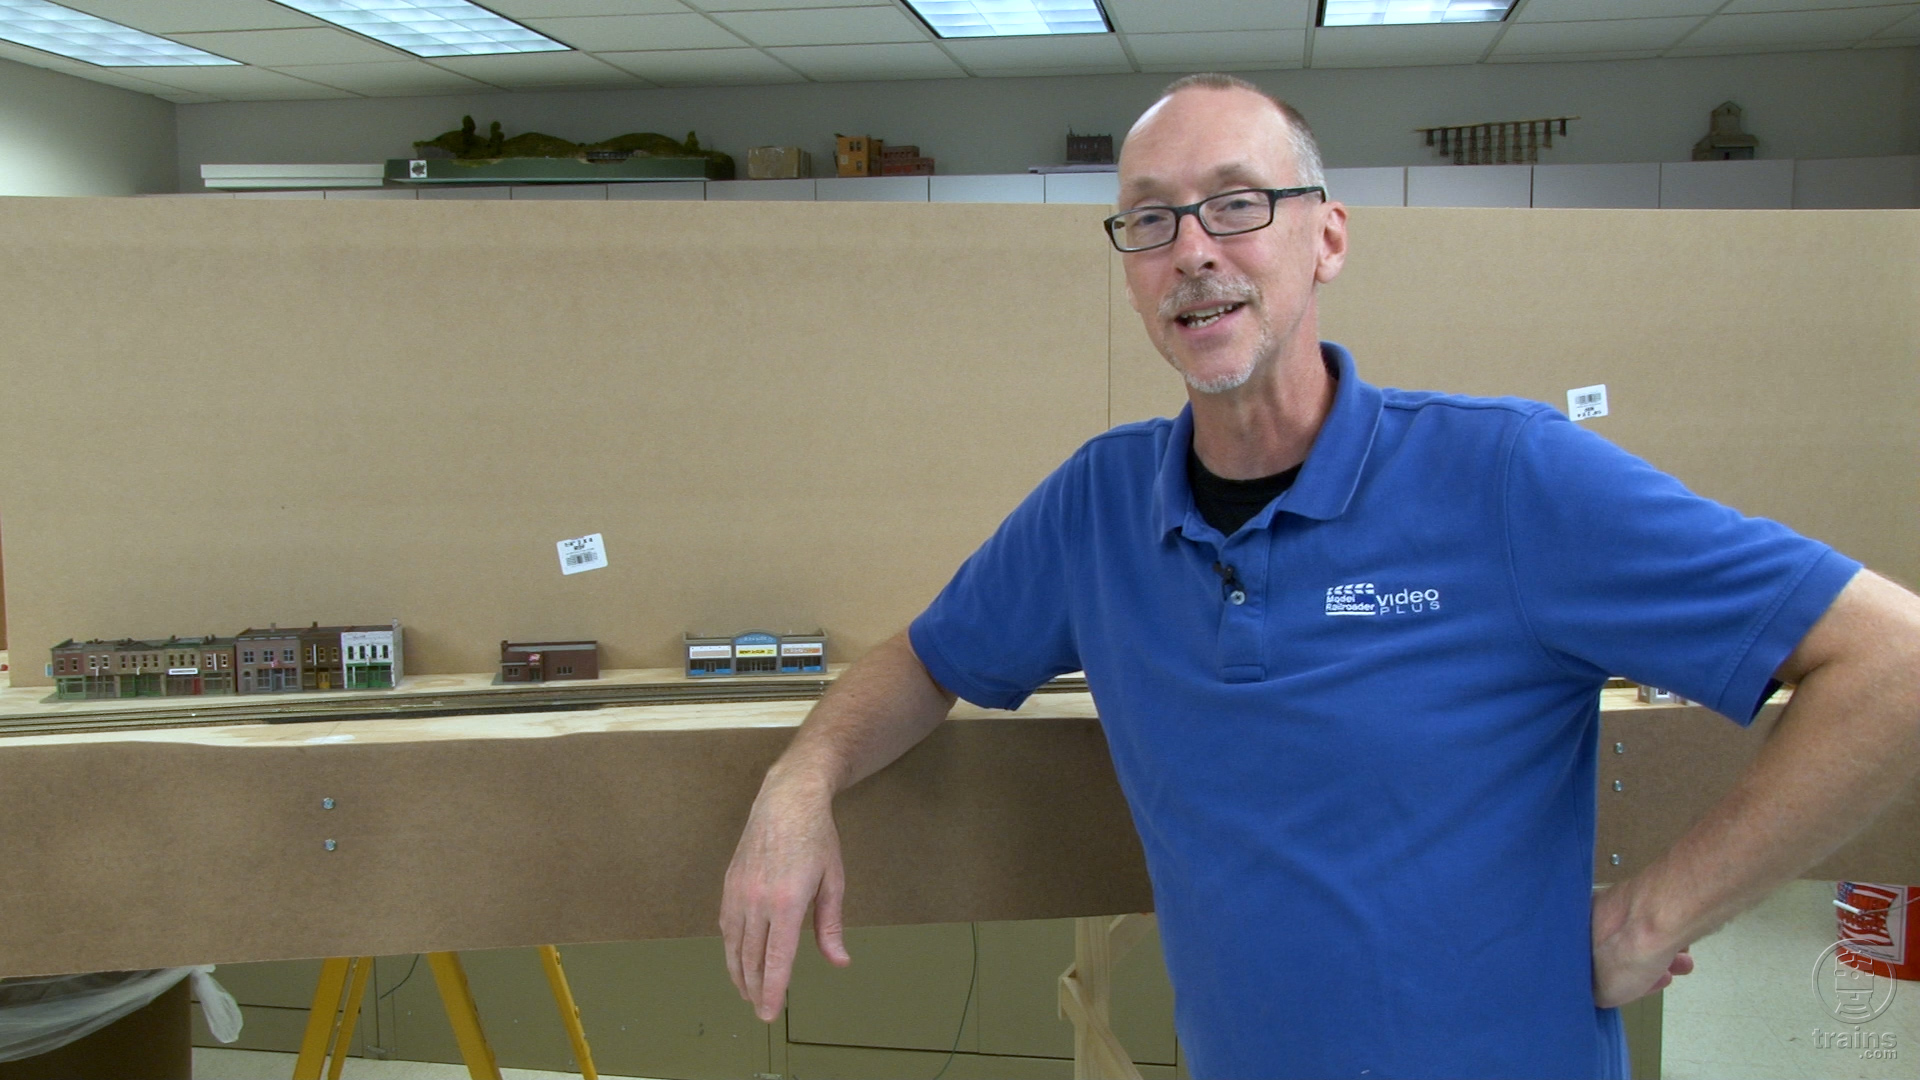 State Line Route in N scale: Installing fascia, Episode 9